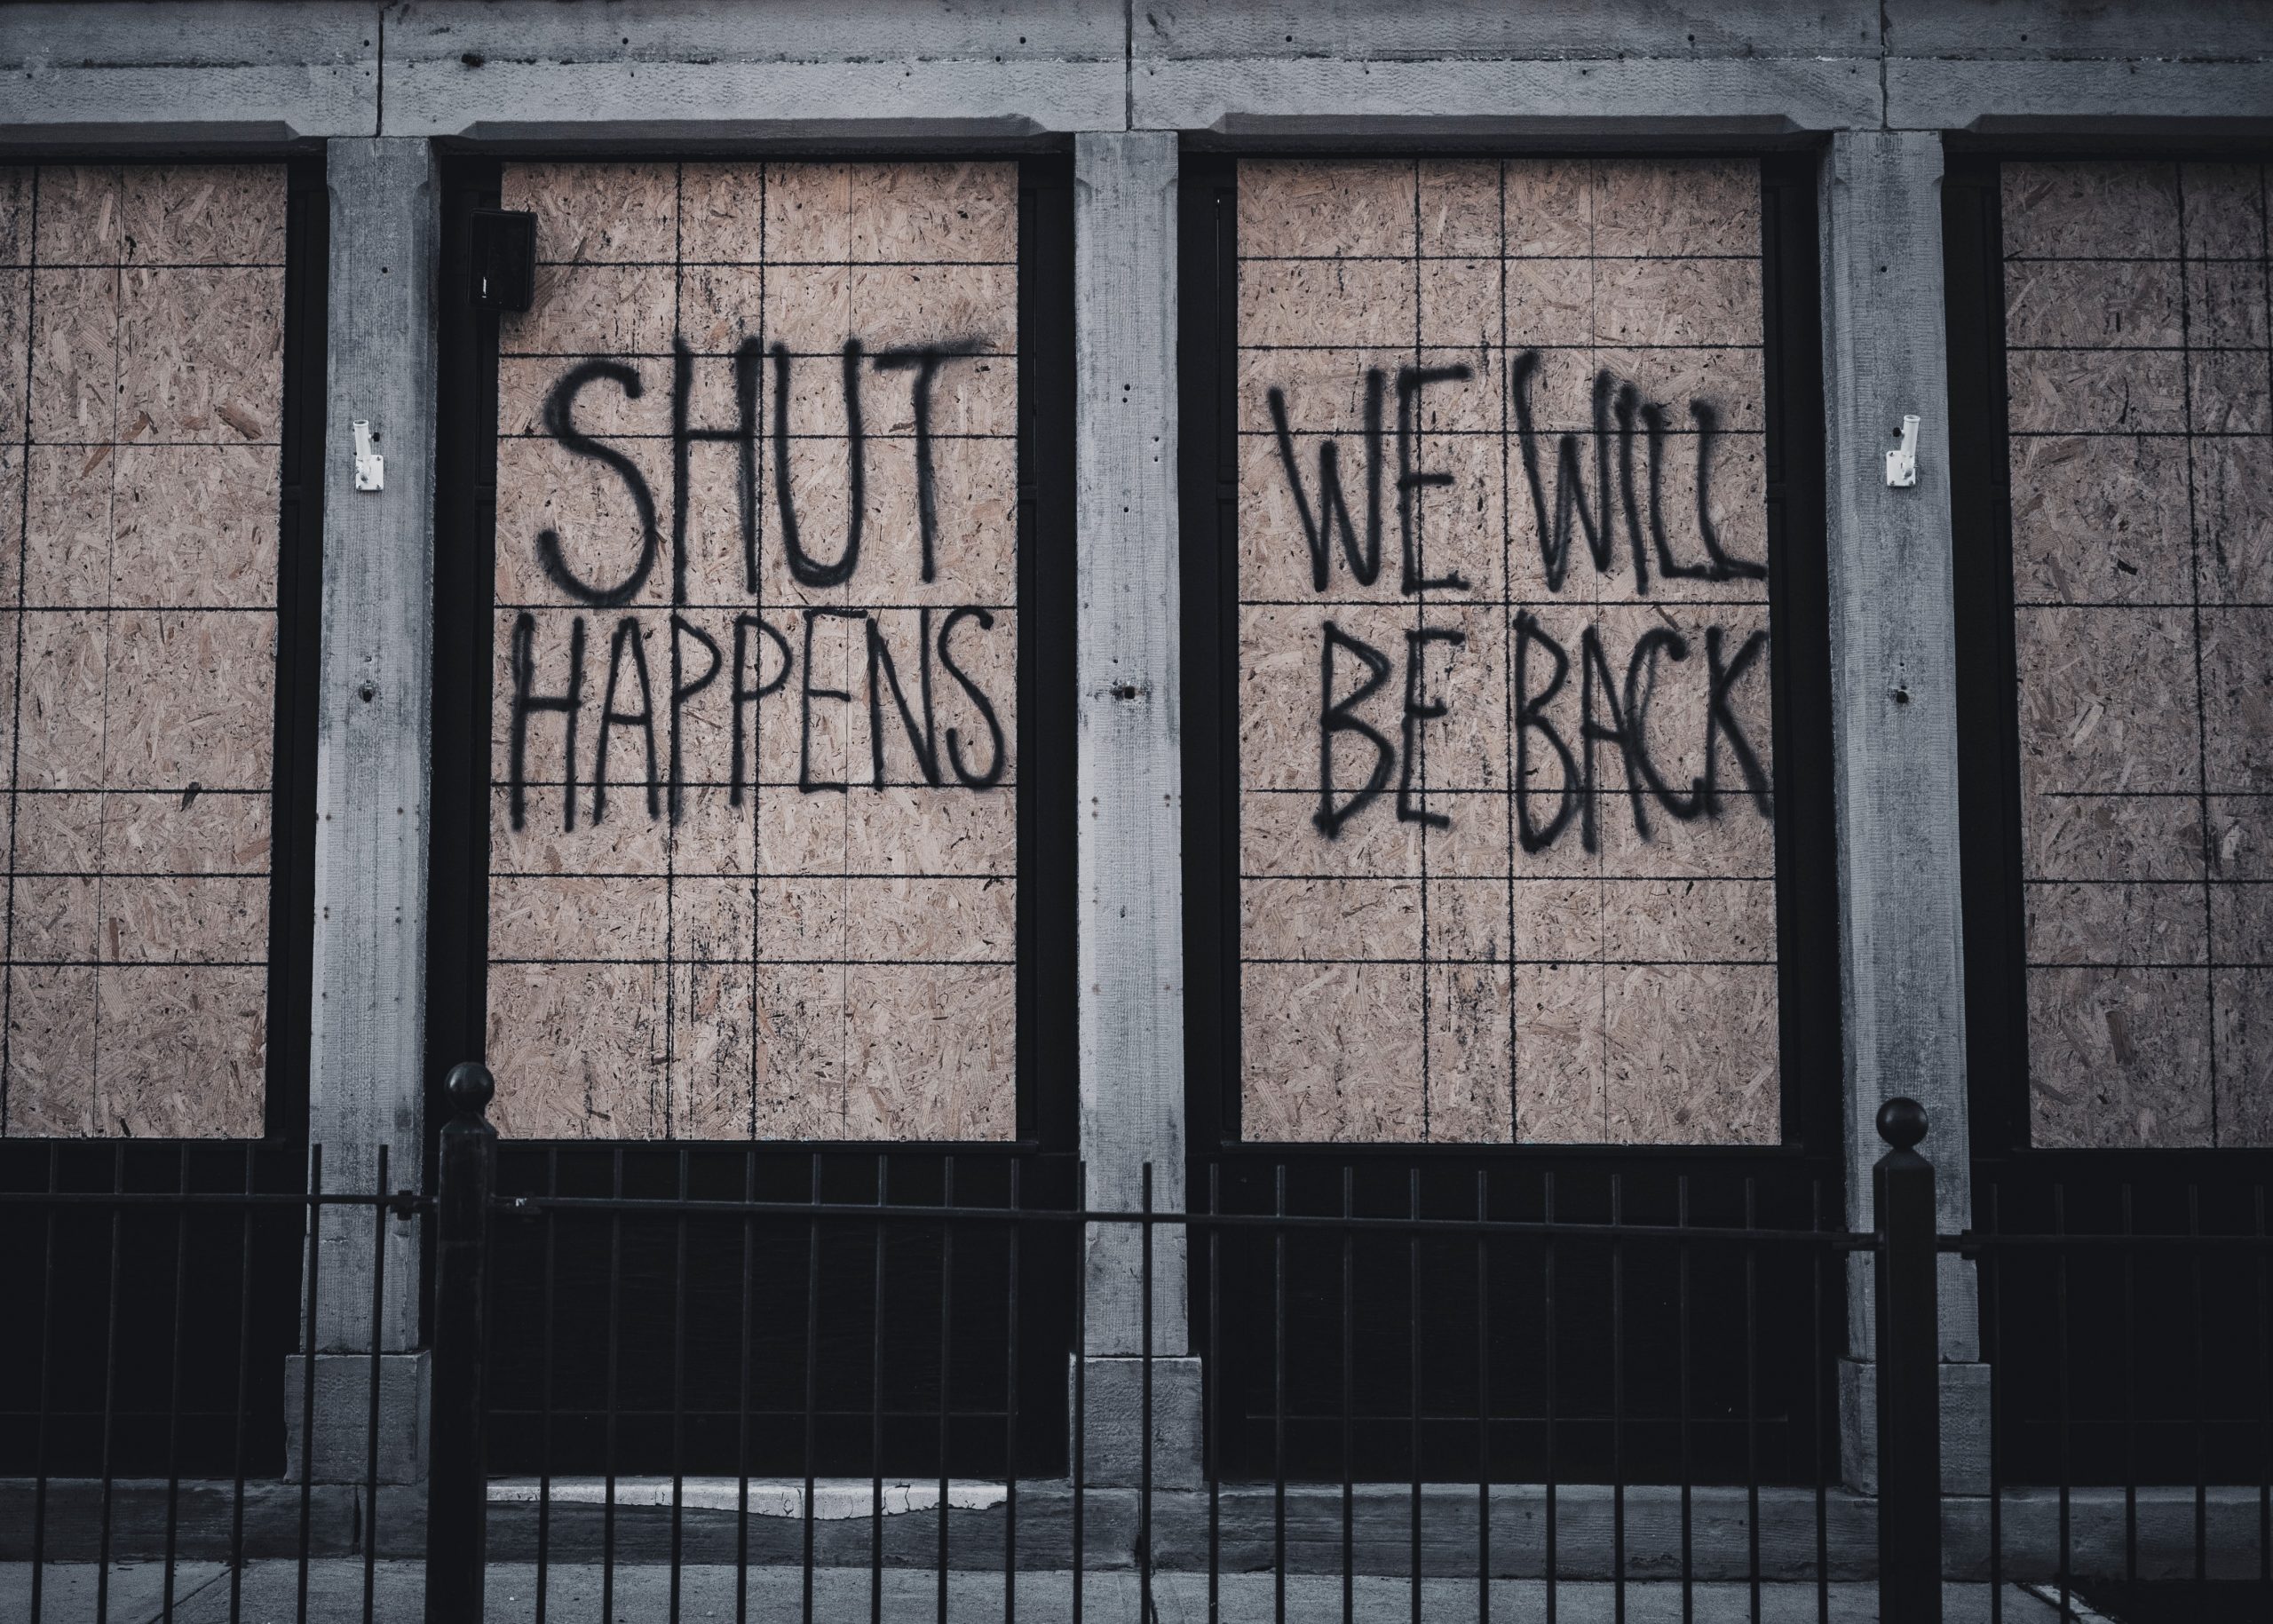 Closed store with graffiti - Shut happens we will be back